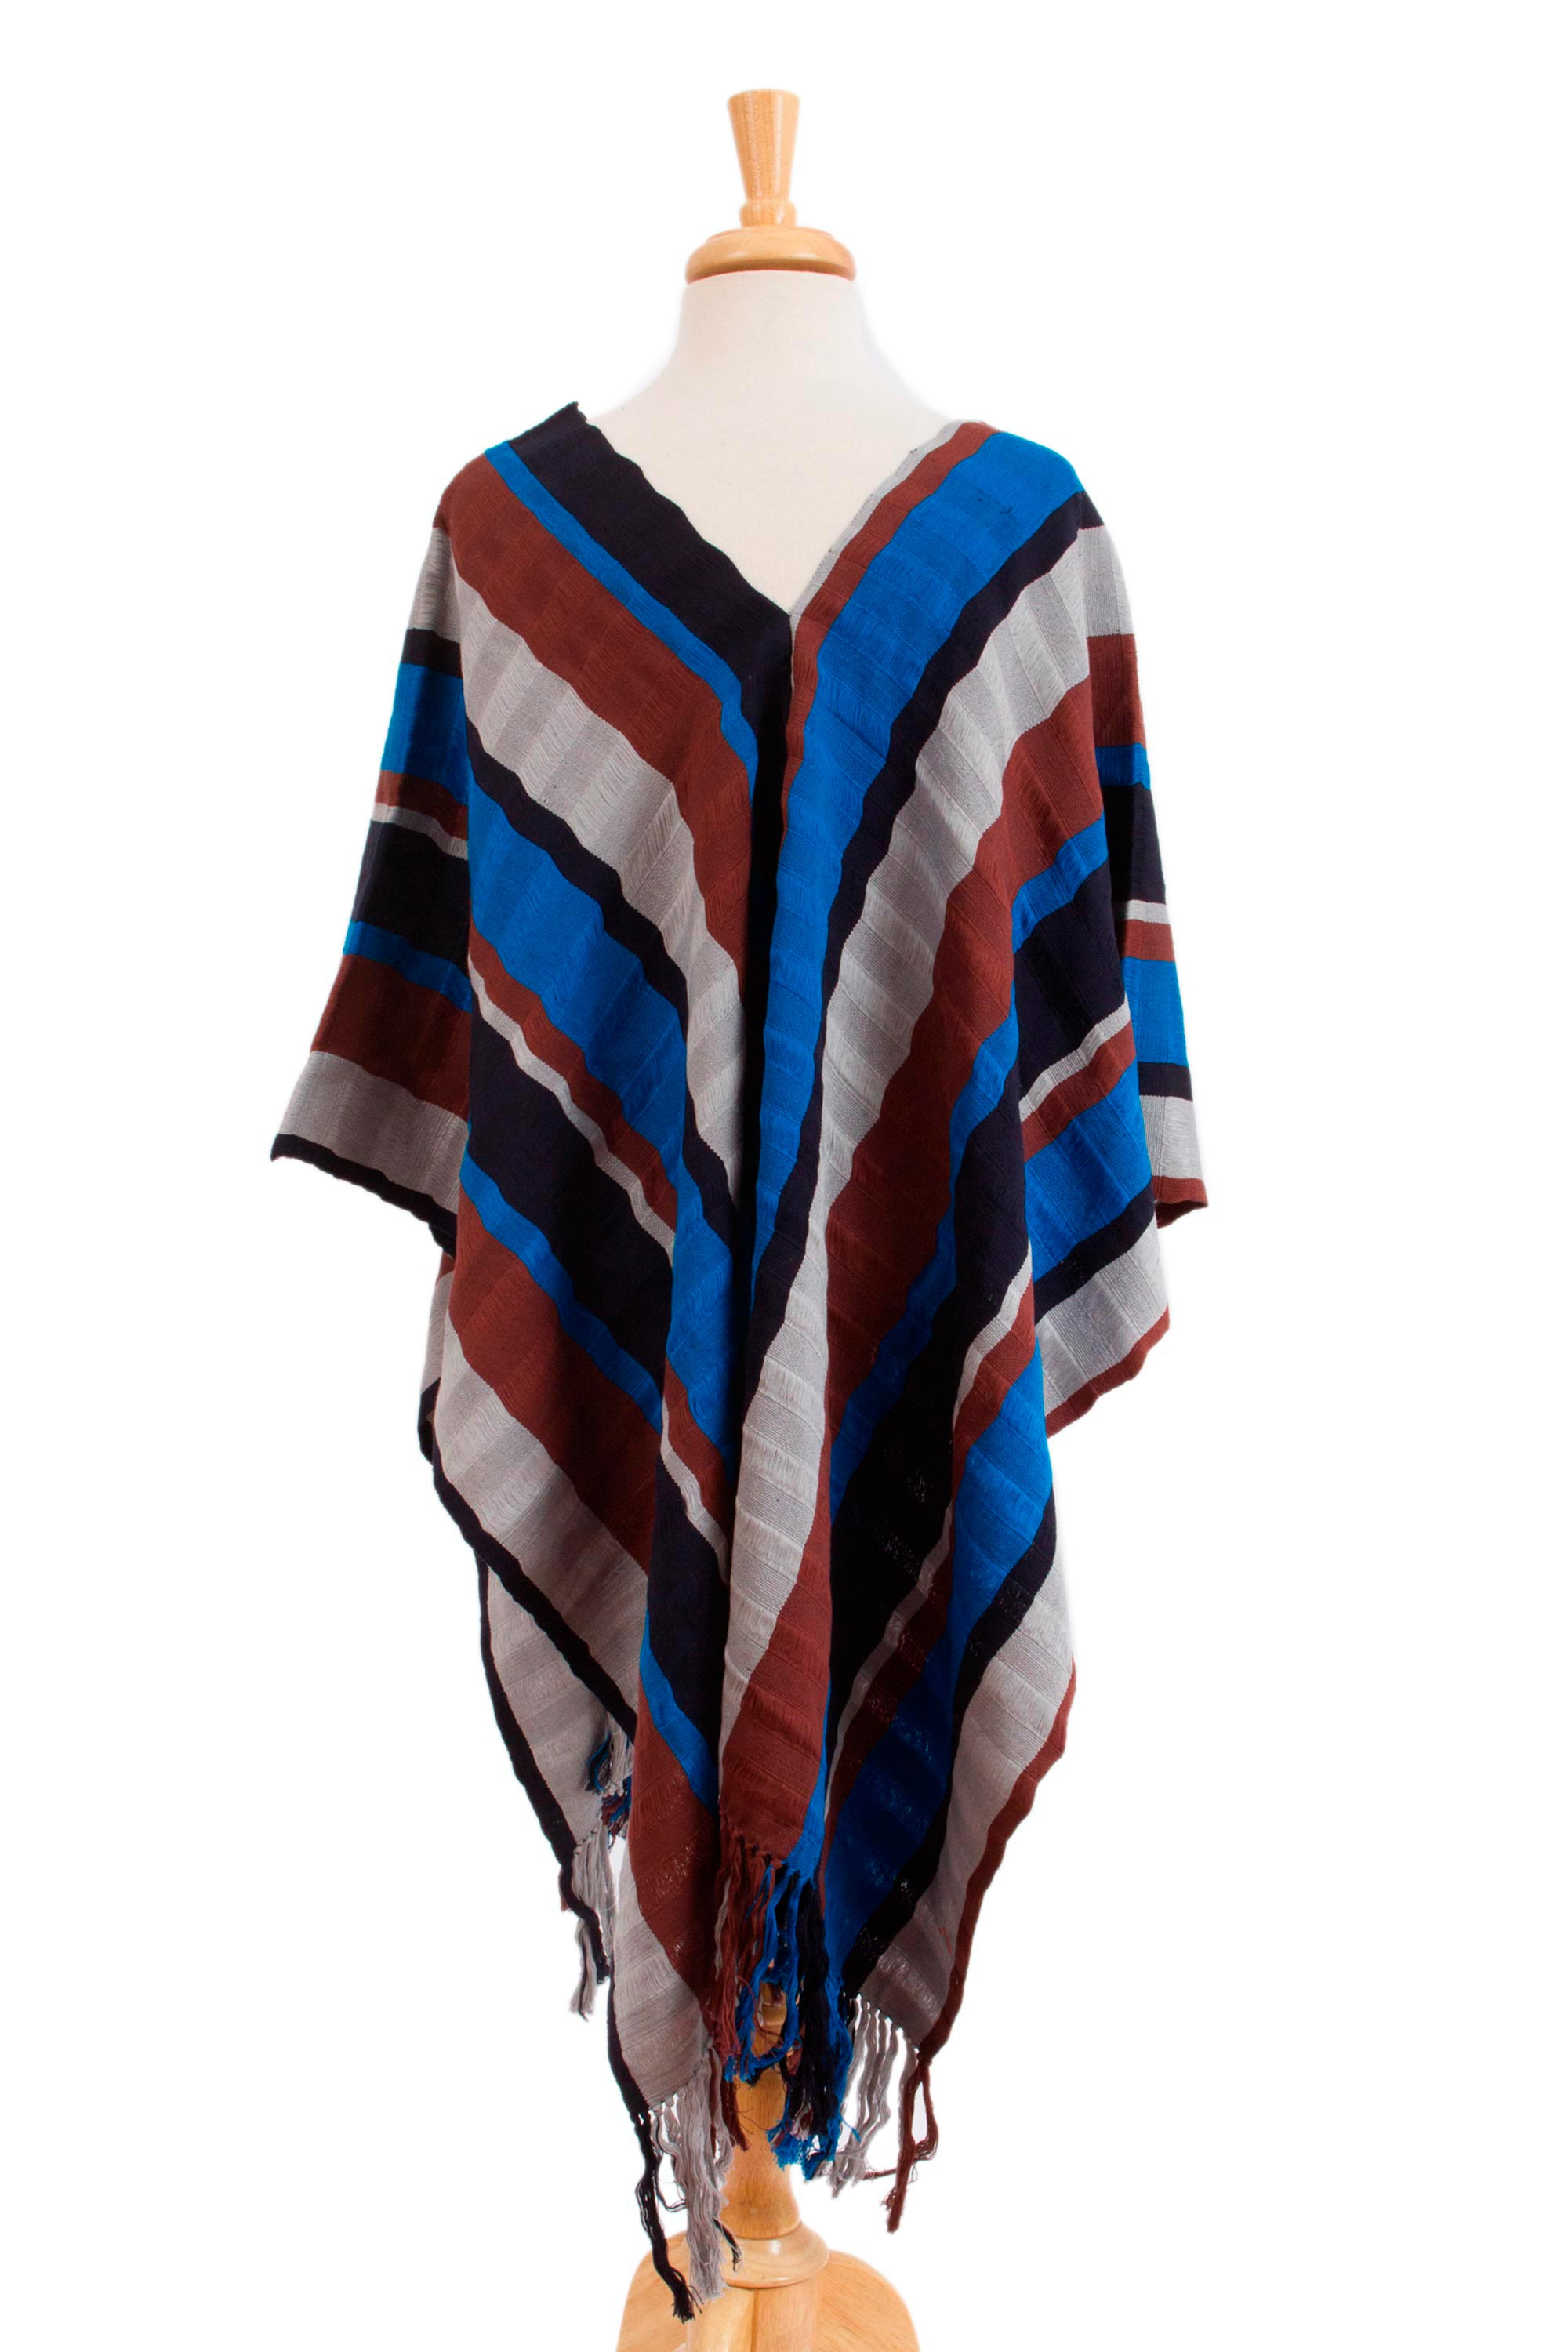 Striped Cotton Poncho Woven on a Backstrap Loom from Mexico - Stripes ...